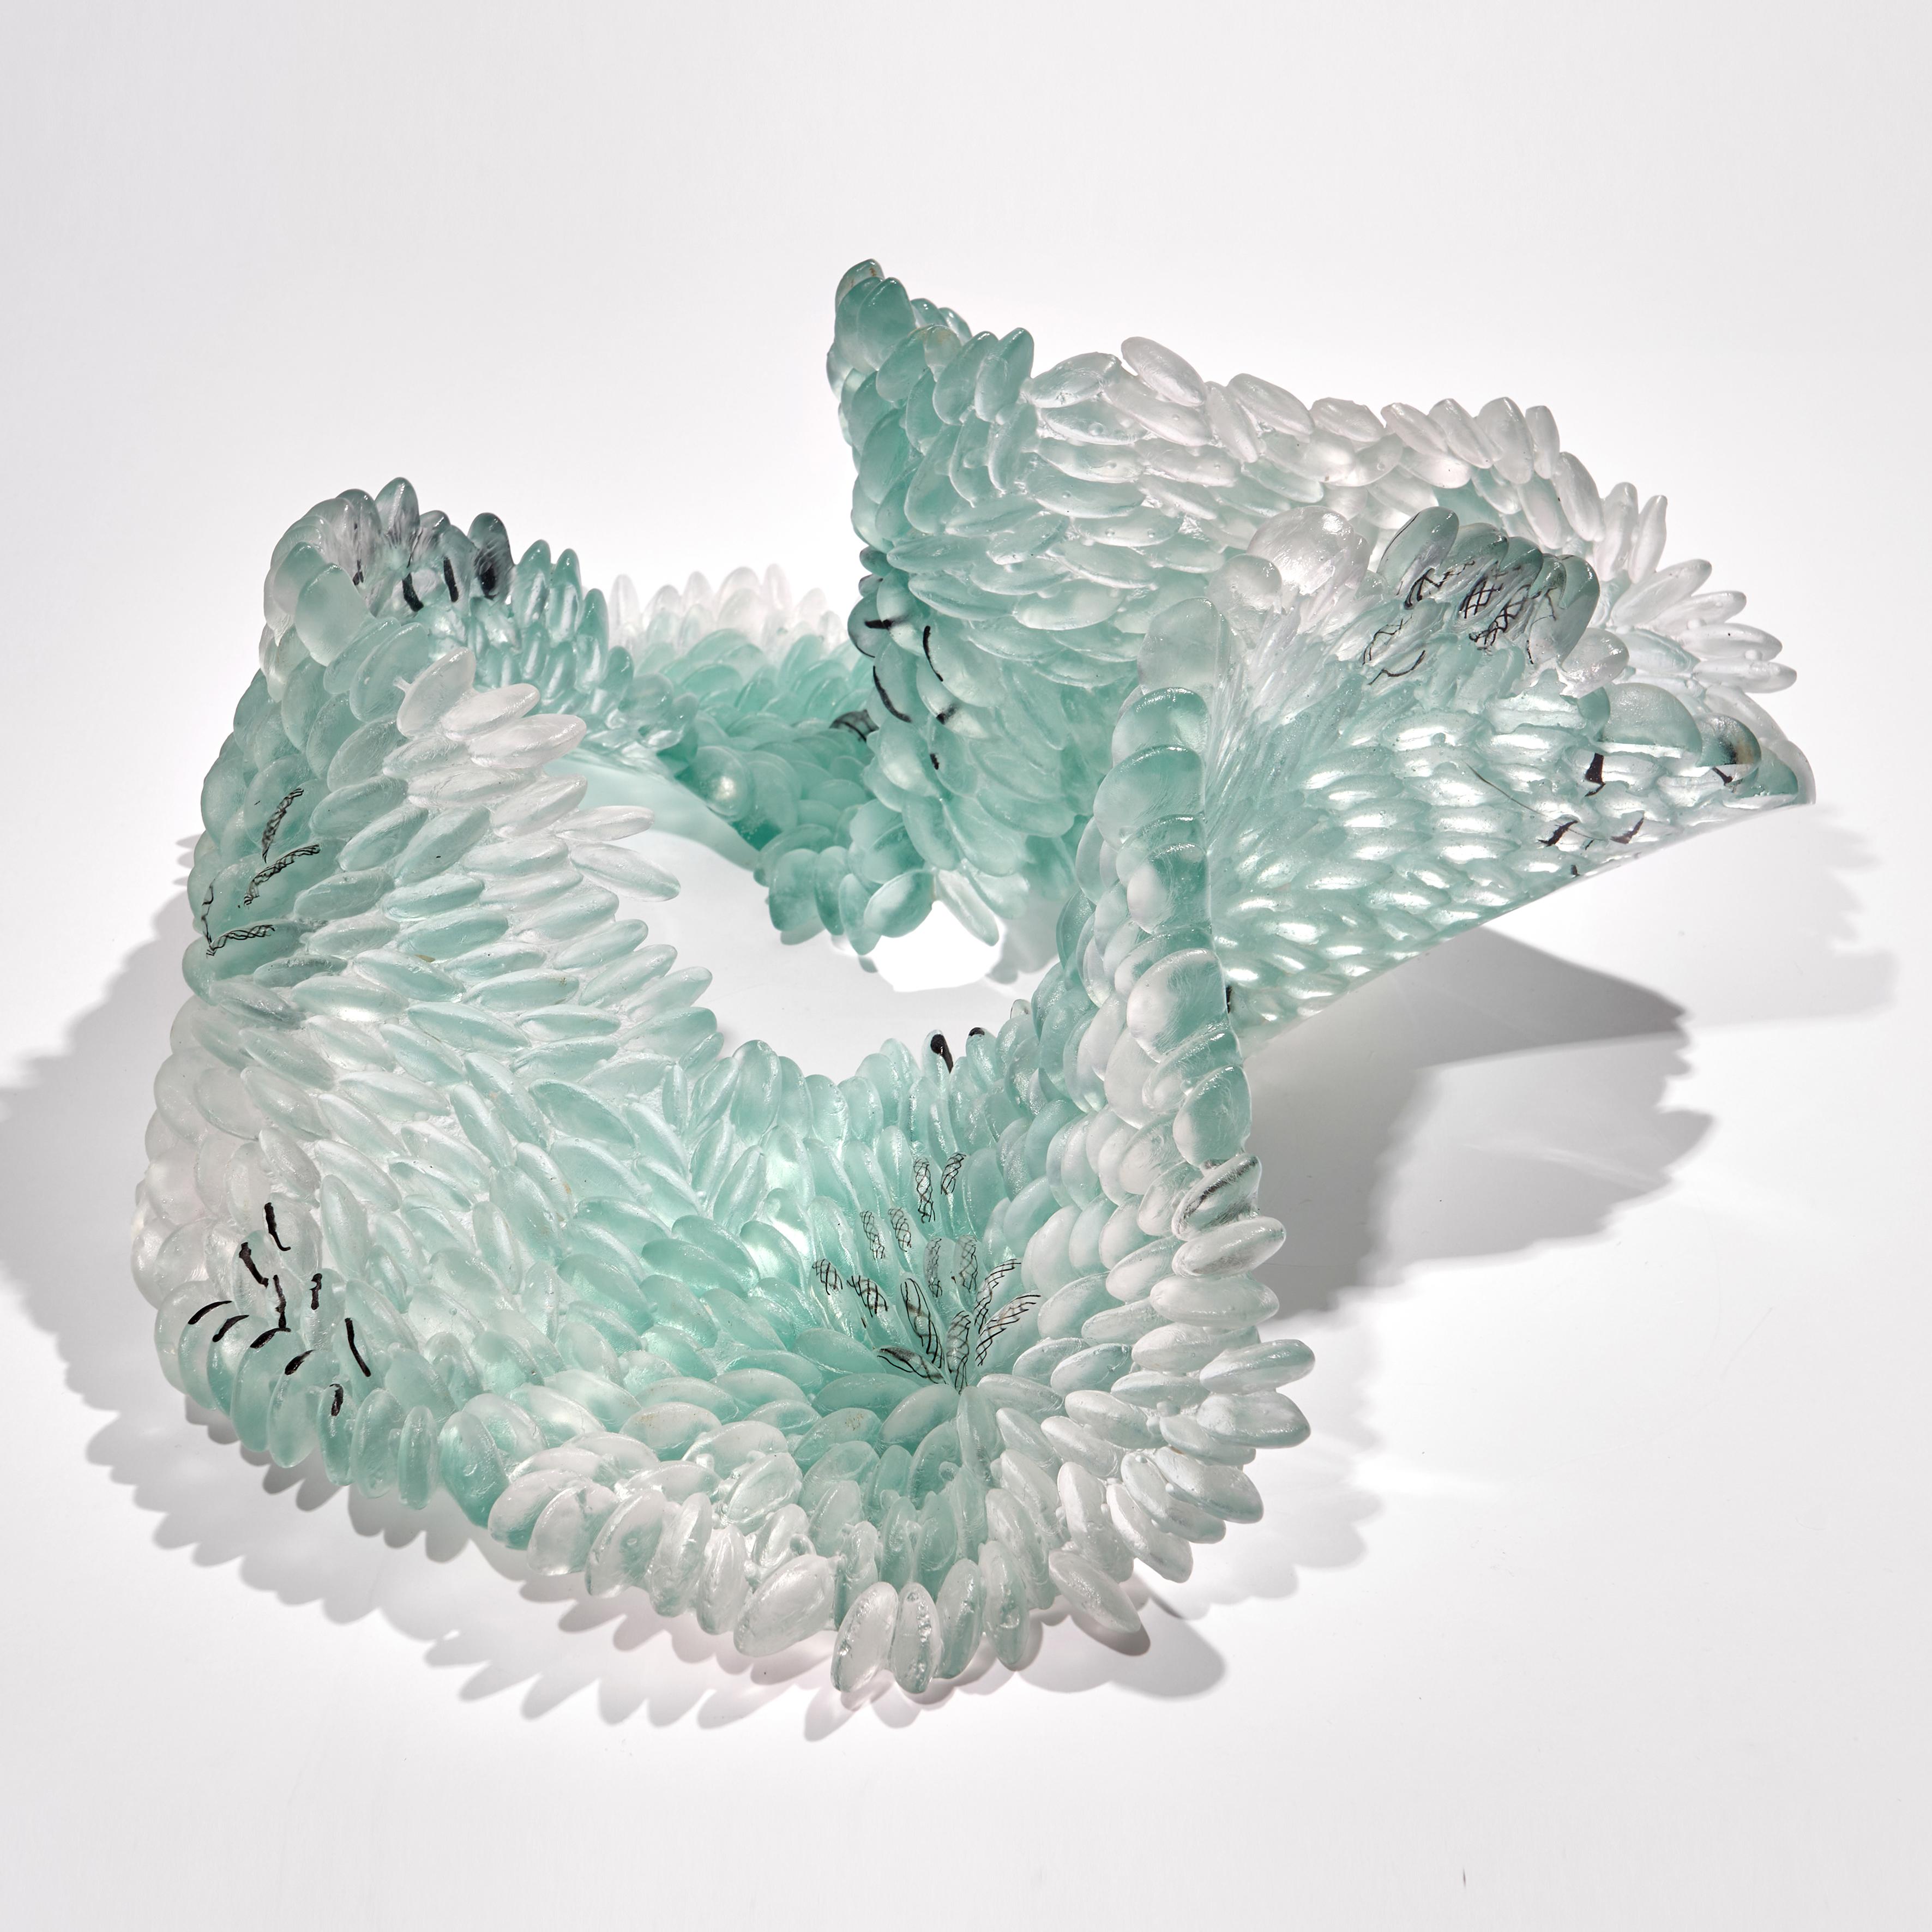 Pale Lichen is a unique textured glass sculpture in soft jade green, light grey and black by the British artist Nina Casson McGarva.

Casson McGarva firstly casts her glass in a flat mould where she introduces all of the beautifully detailed,